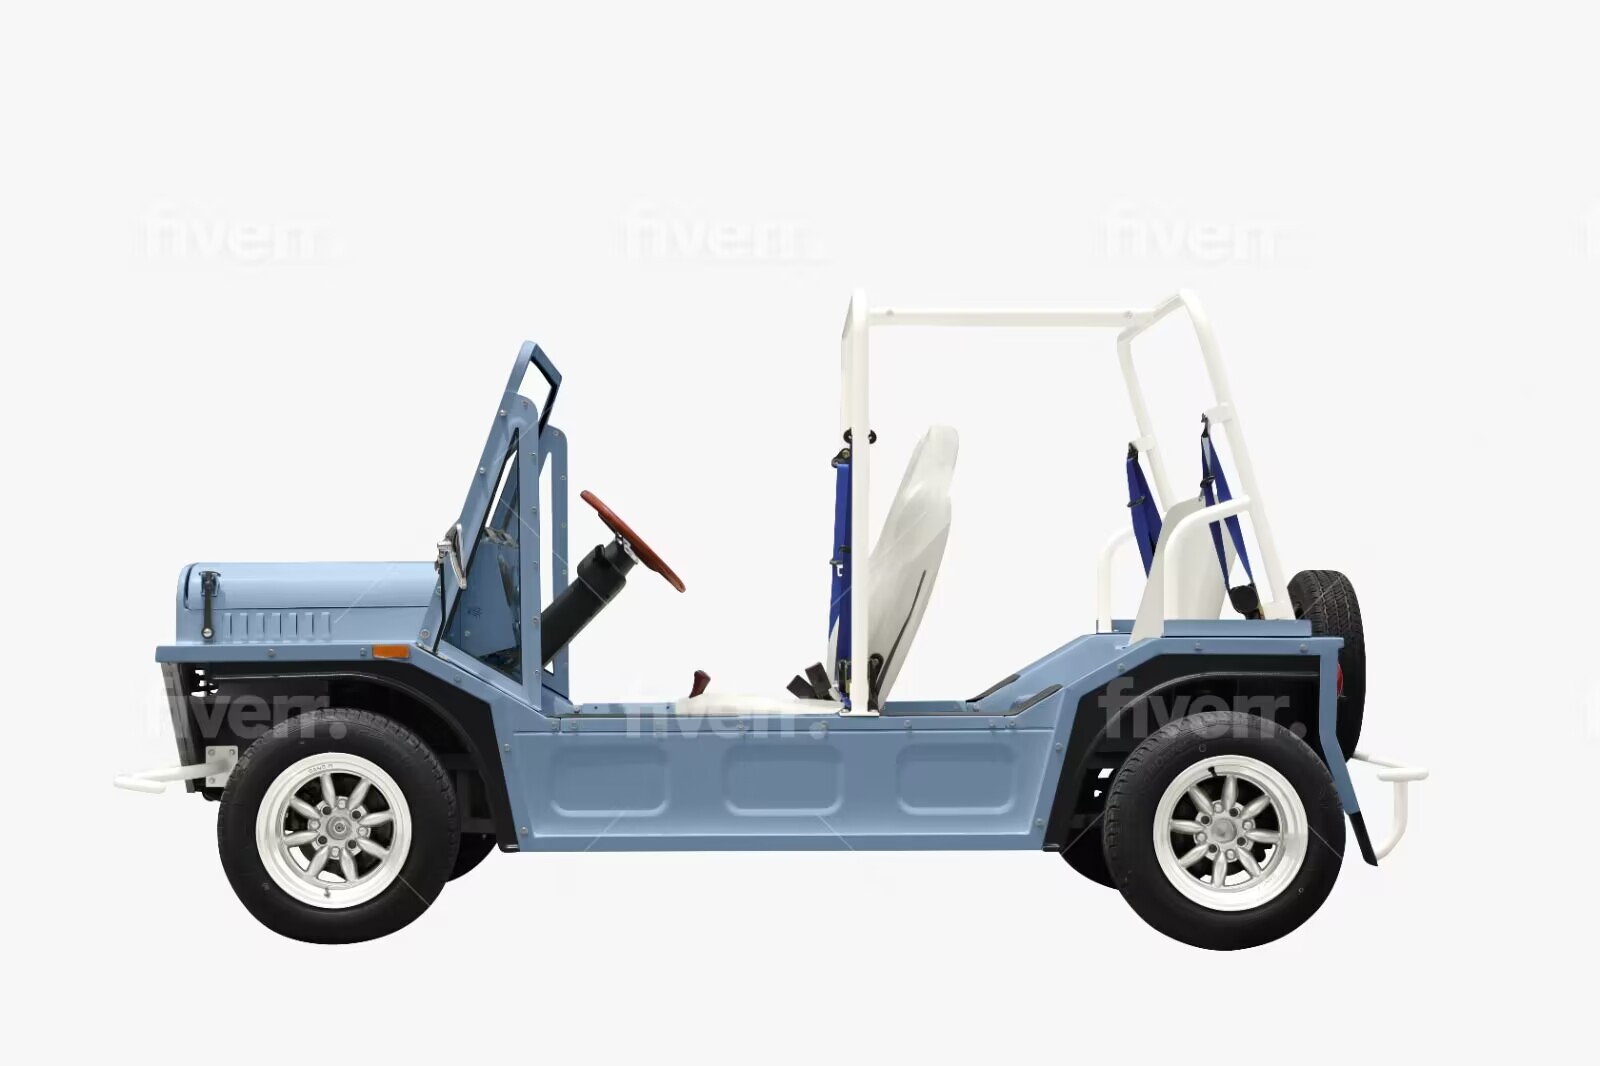 our MOKE is about to enter the American market